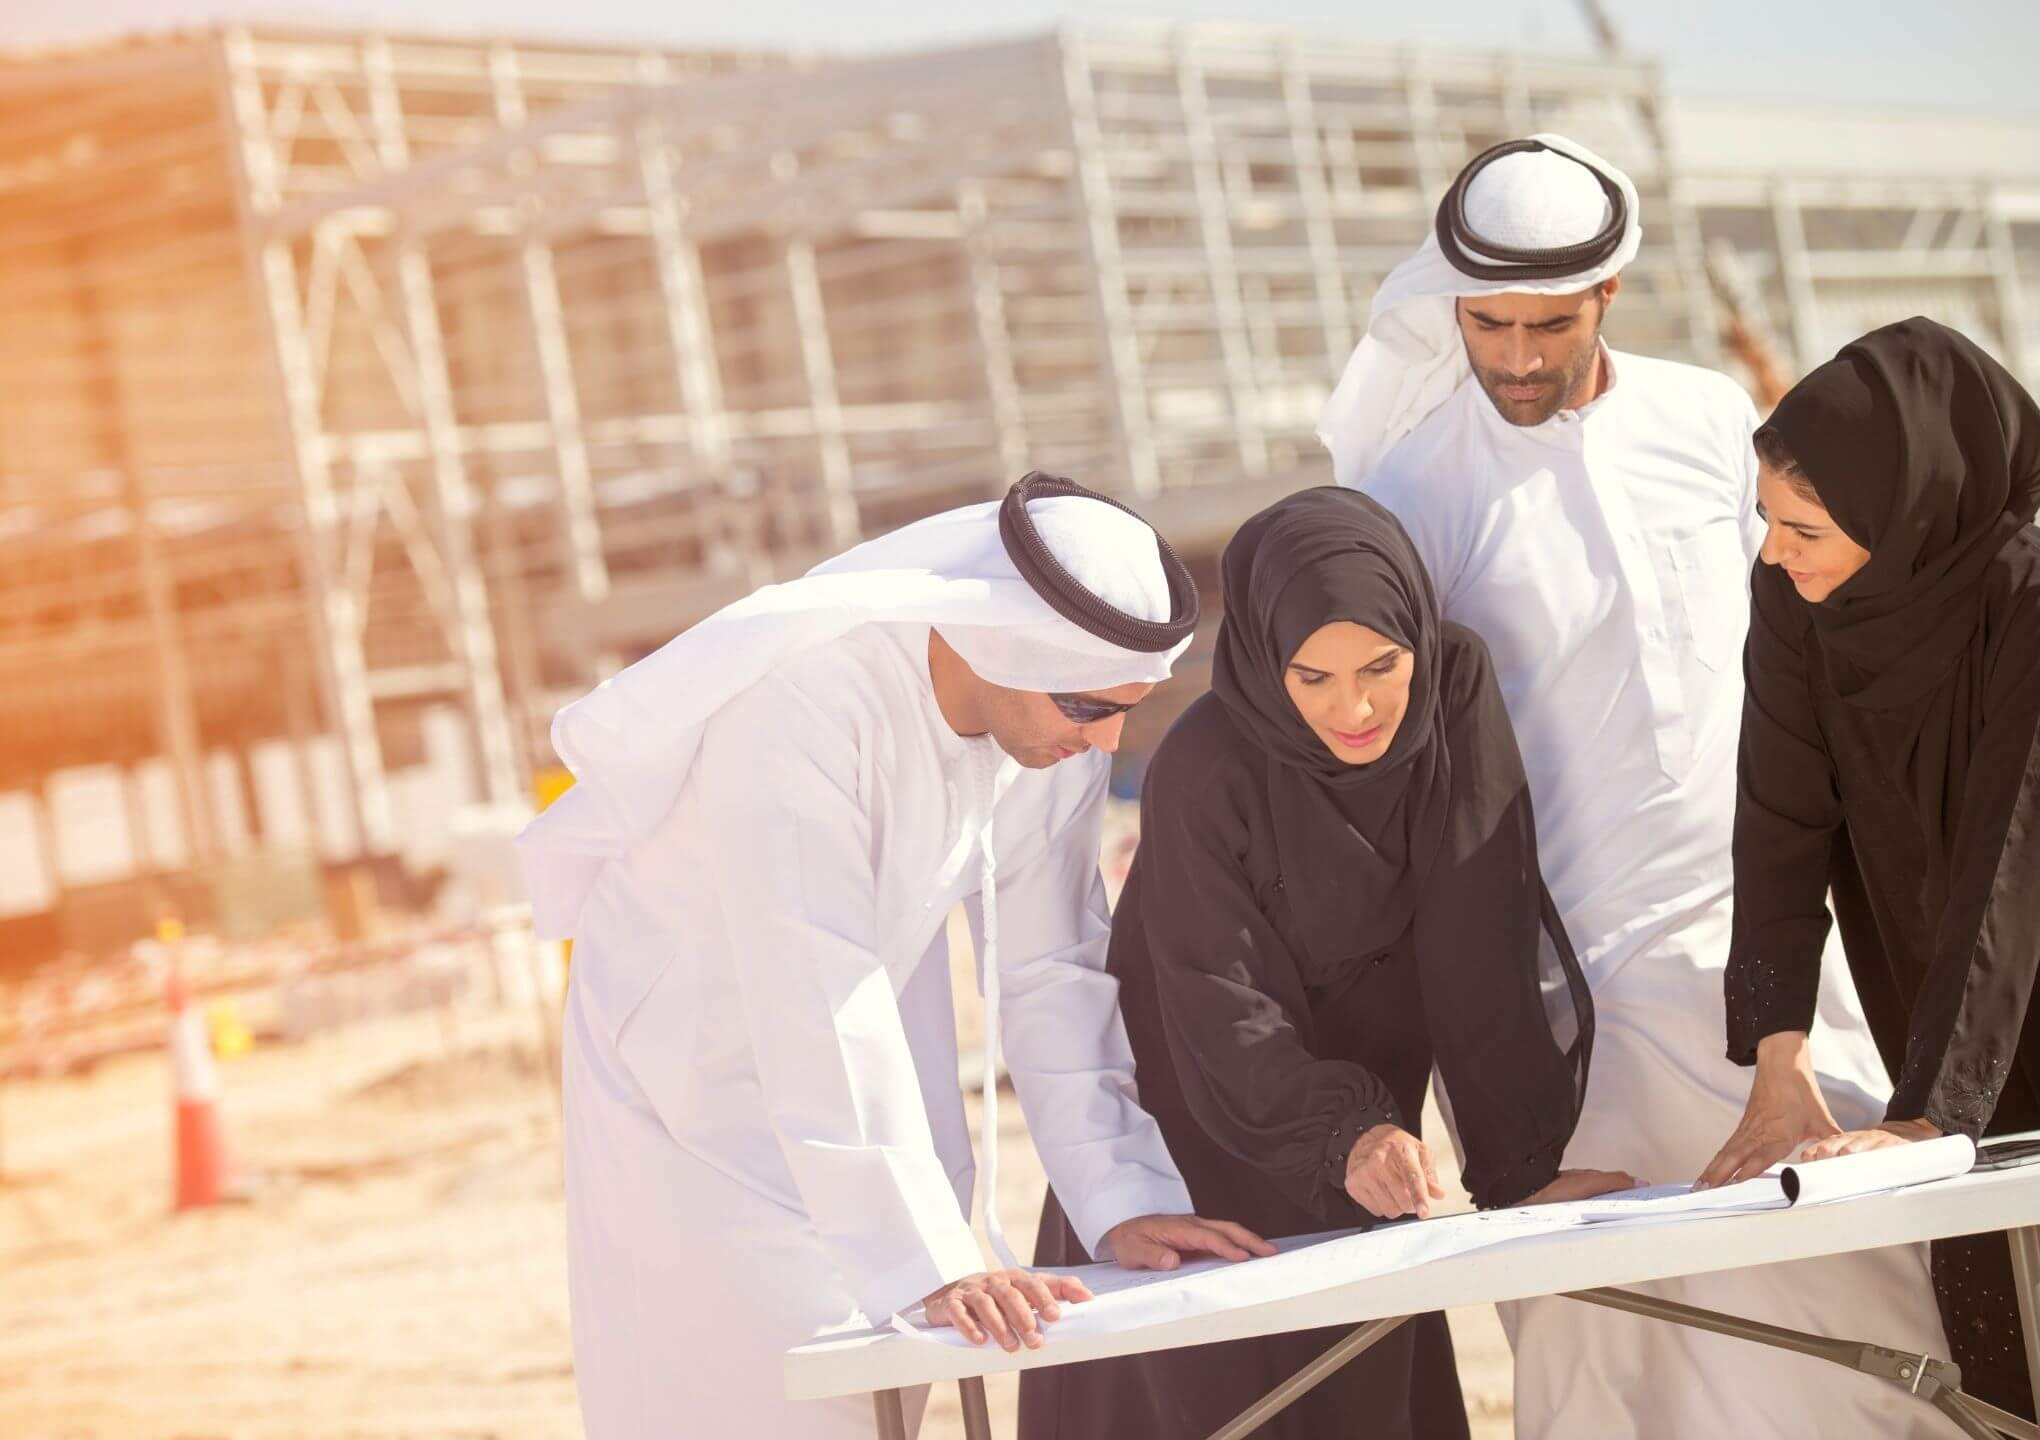 Construction recruitment in UAE: 5 tips for smart hiring